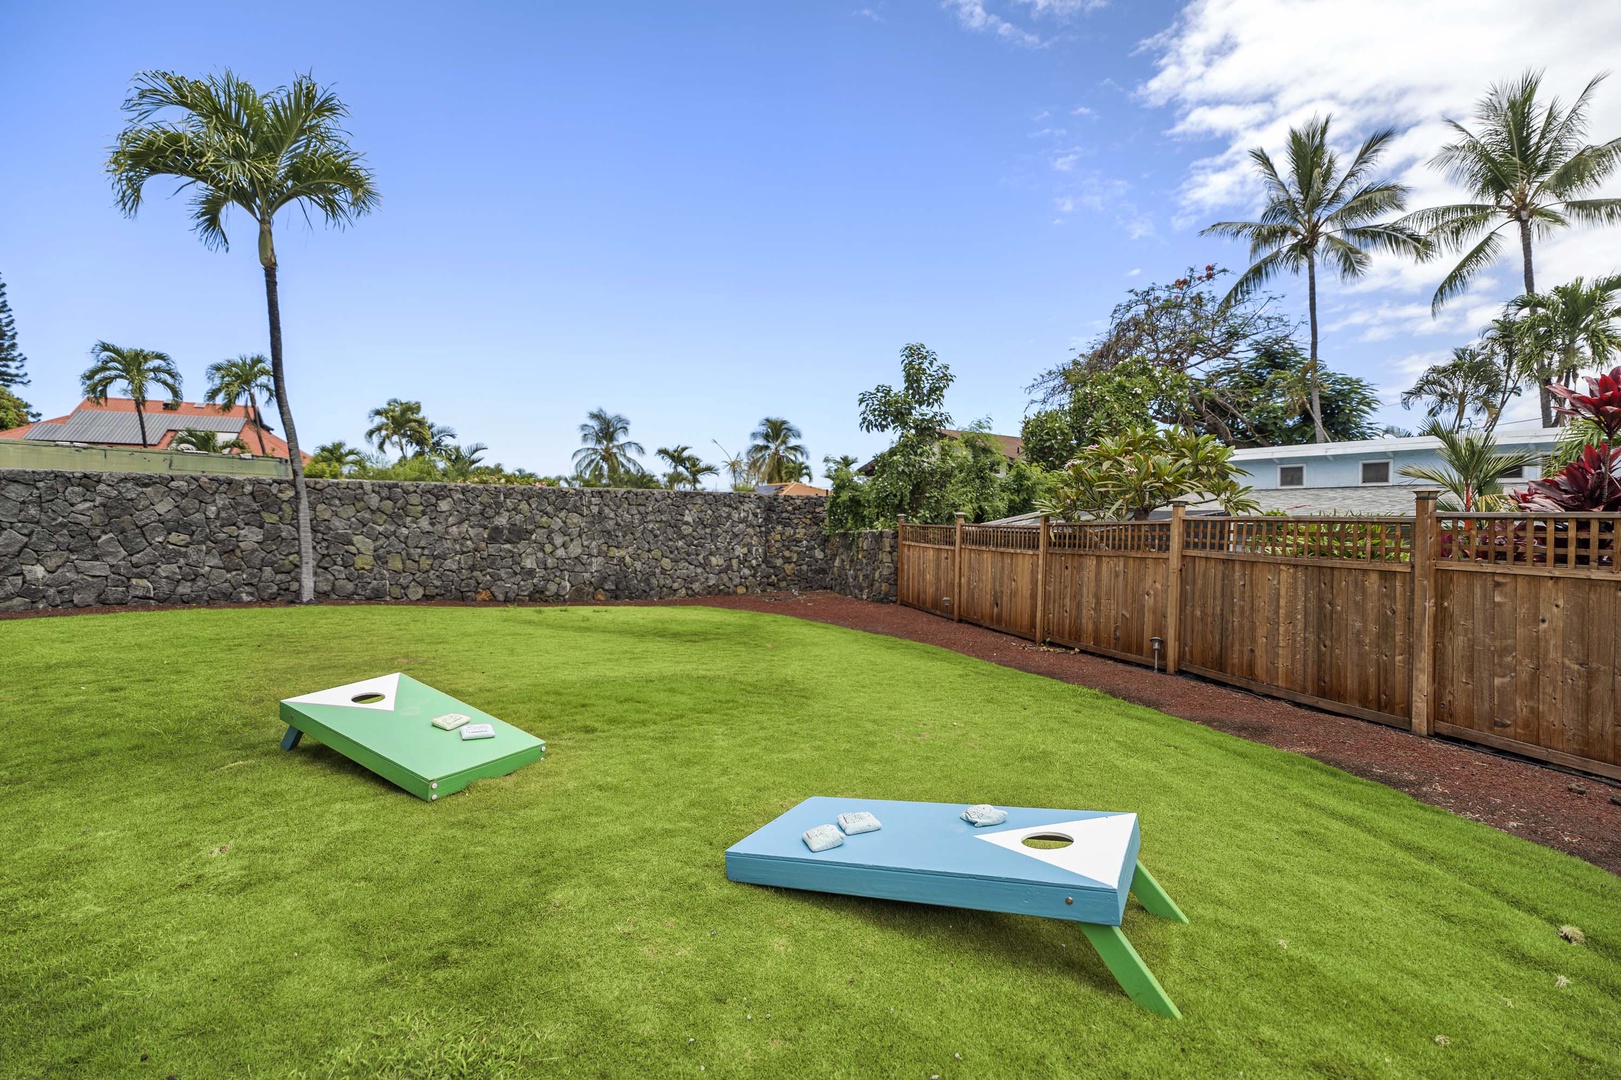 Kailua Kona Vacation Rentals, Hale A Kai - Outdoor activities for guests of all ages!